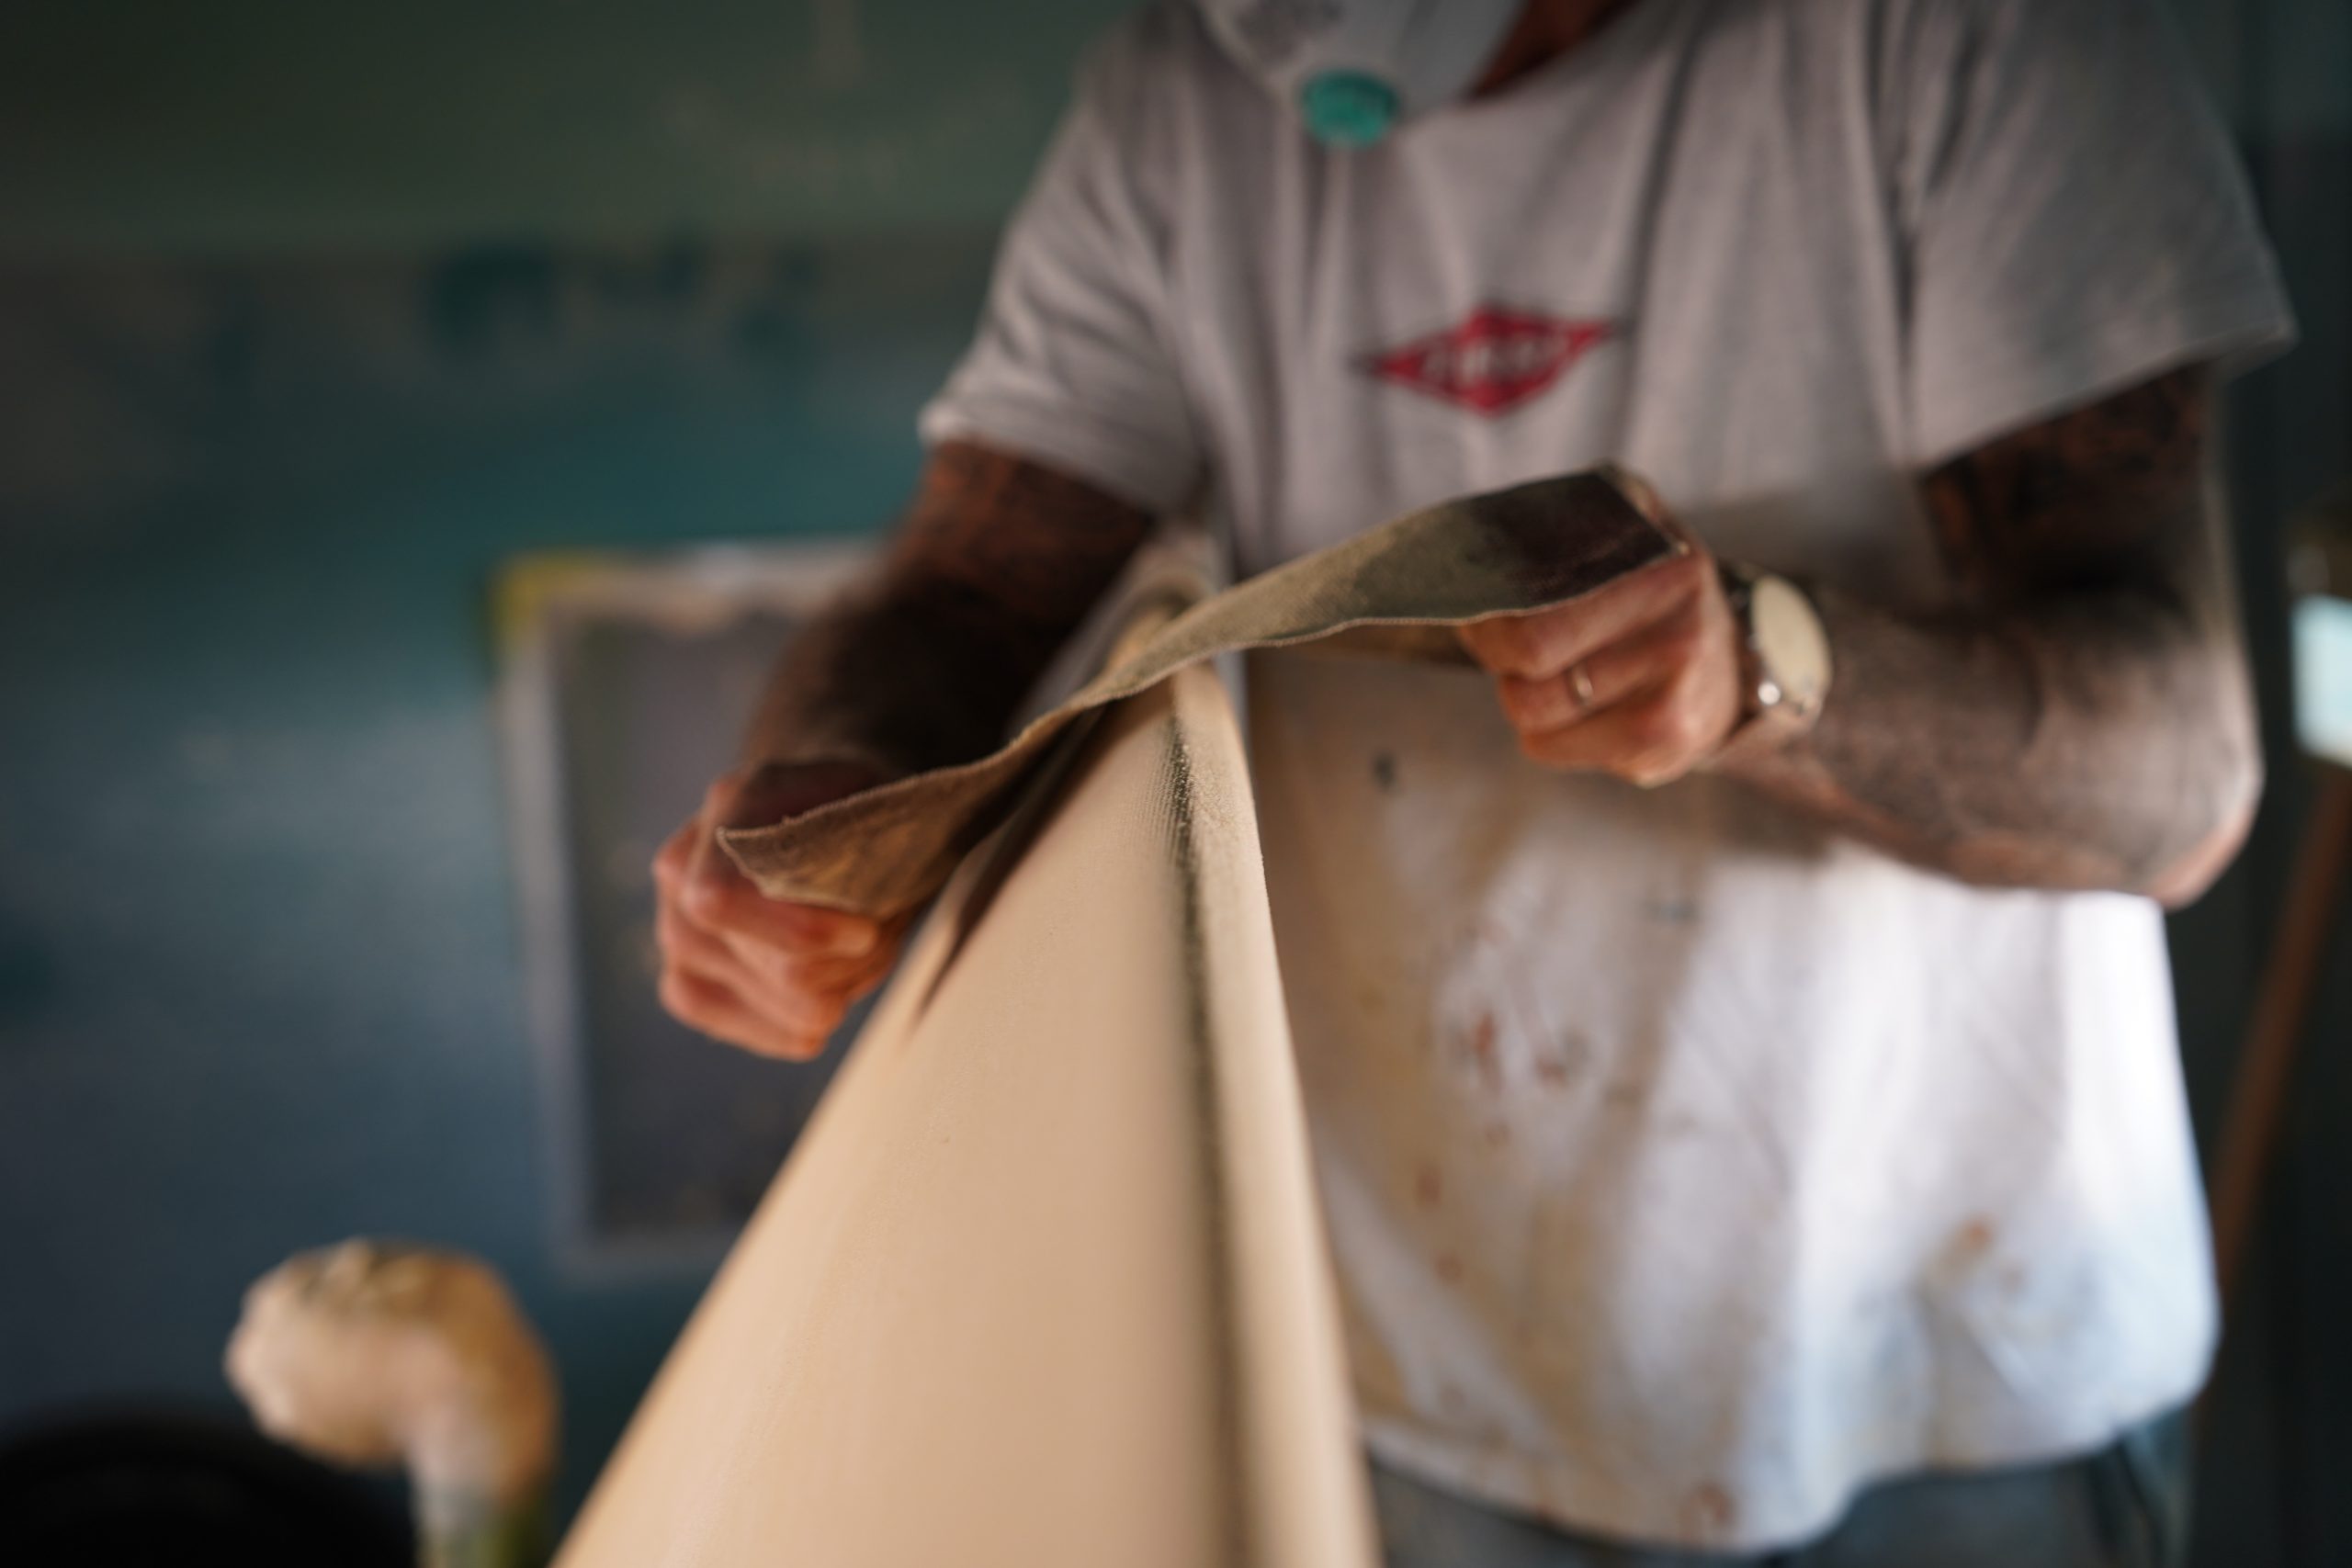 Shaper using sandpaper to finish the rail of the surfboard